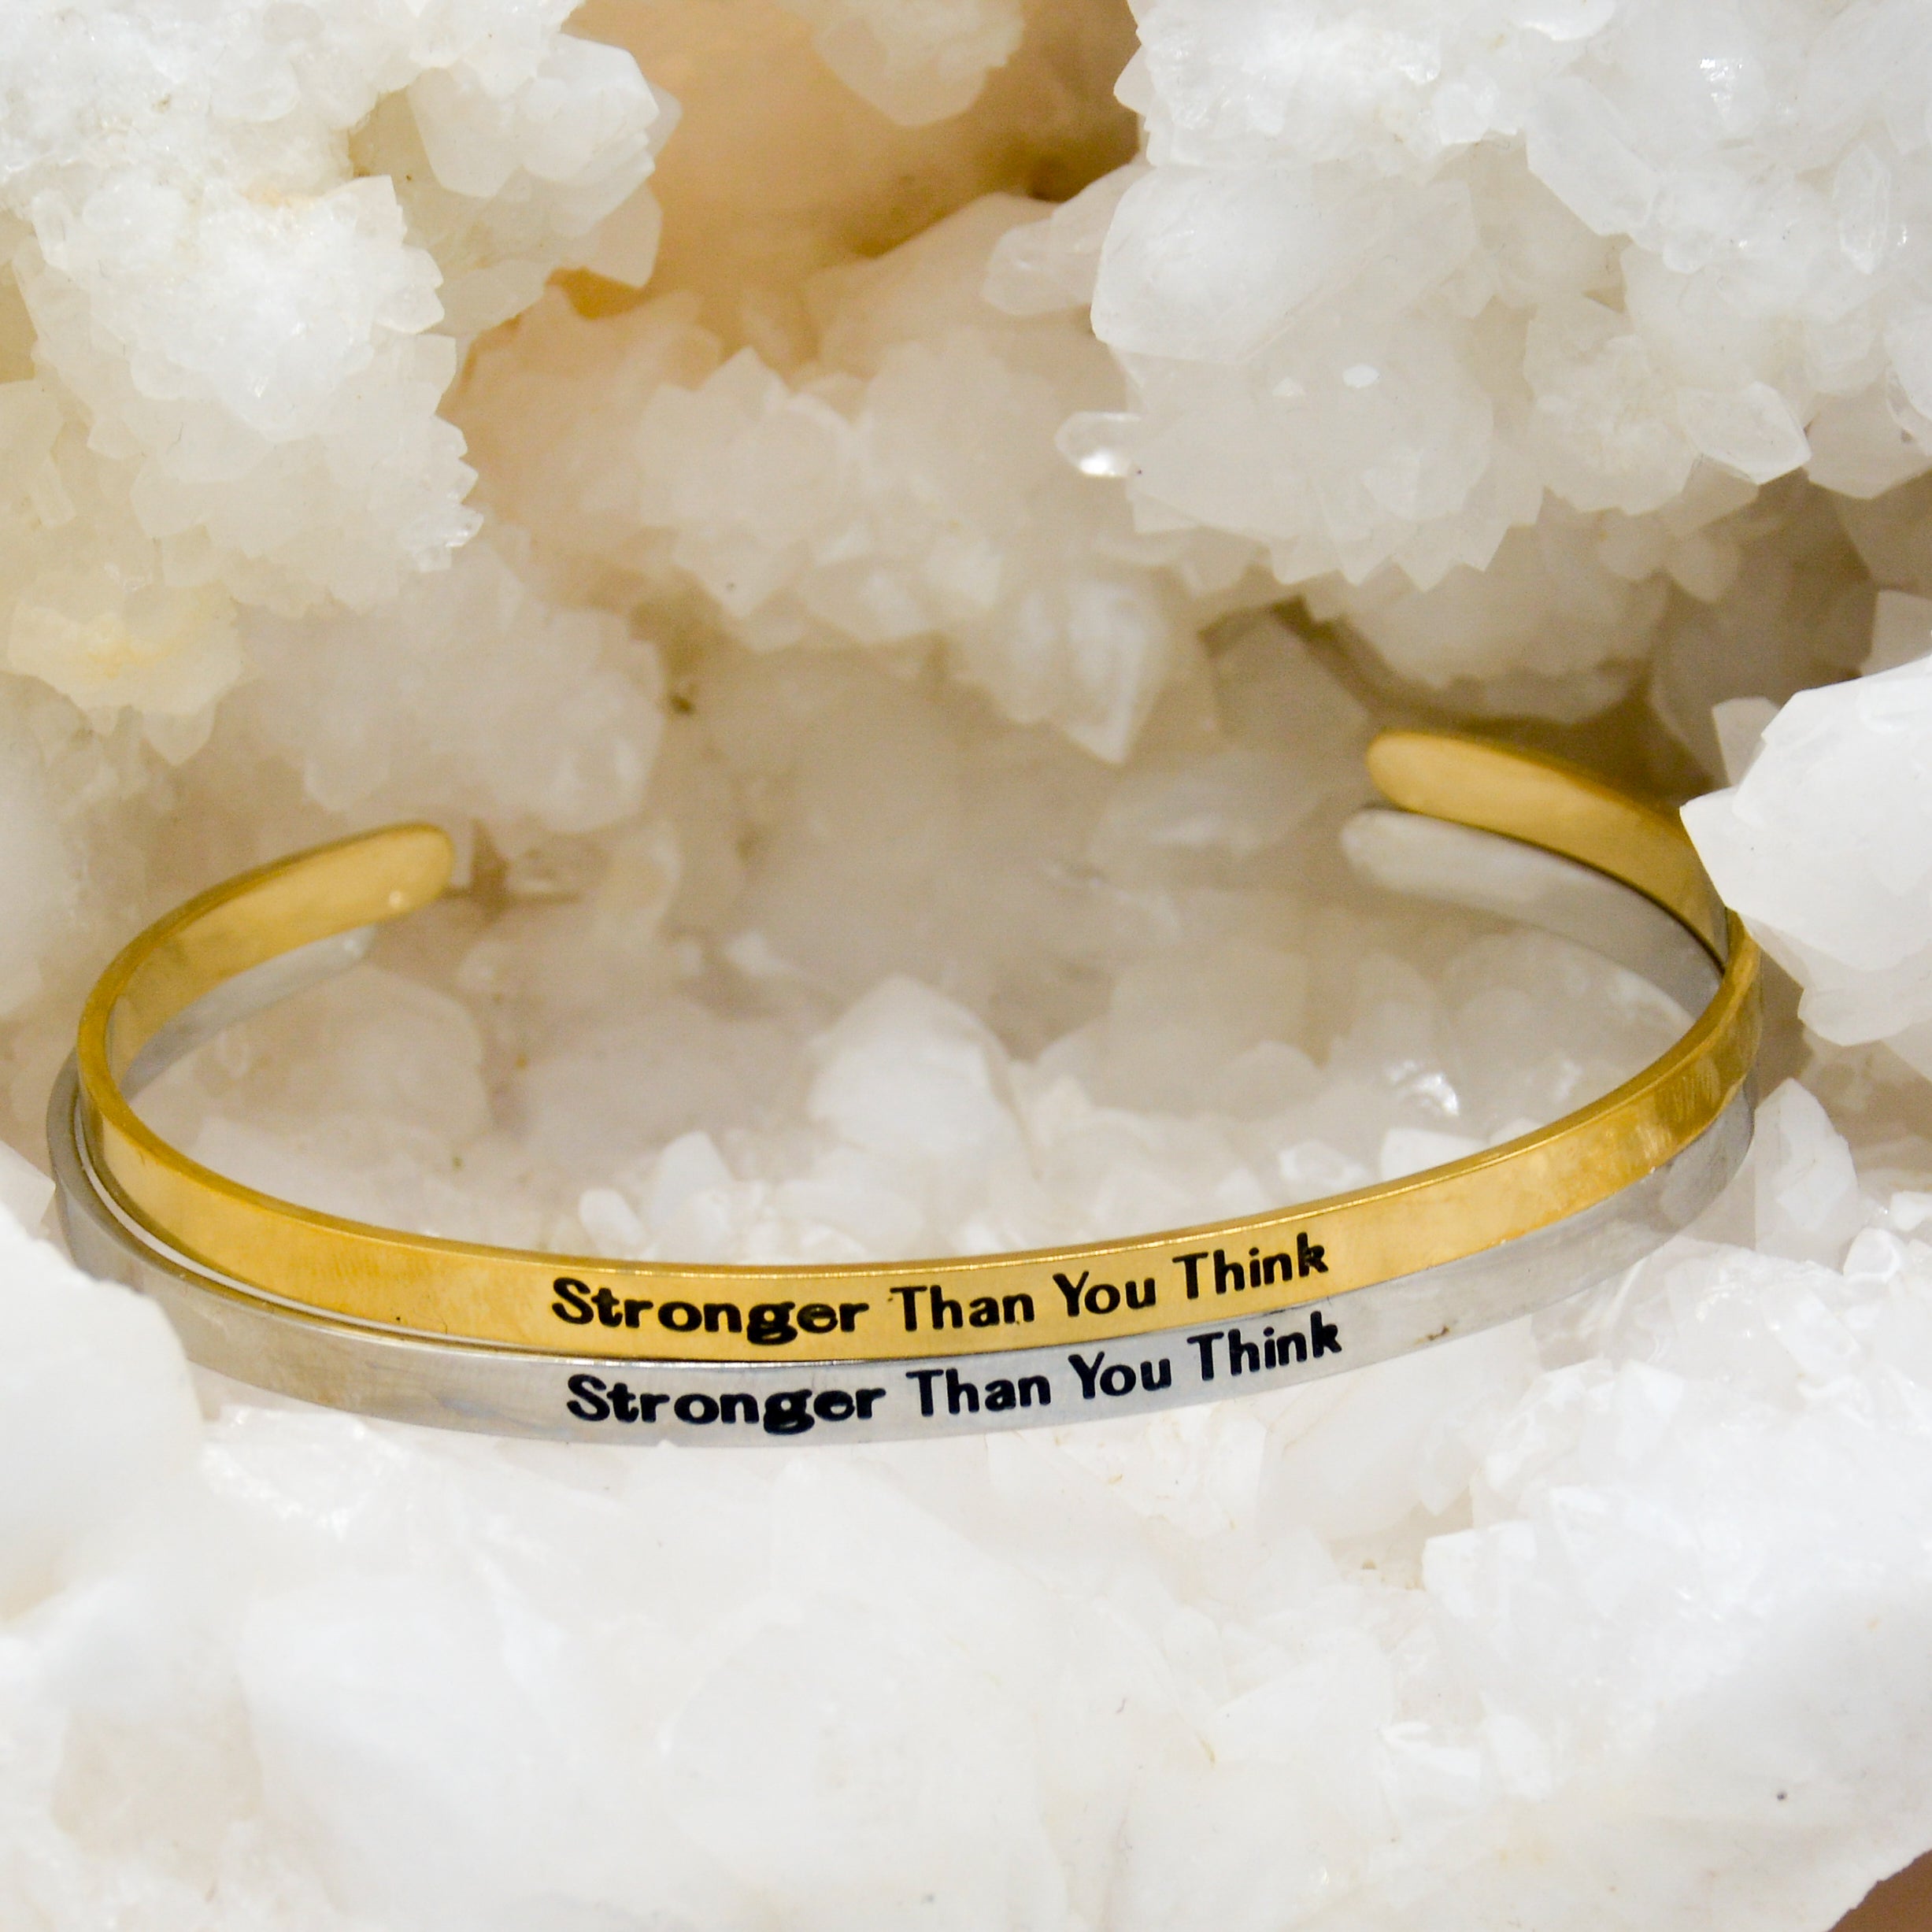 Echoes of Empowerment - Petite Stainless Steel Bracelets by Faith2Felicity